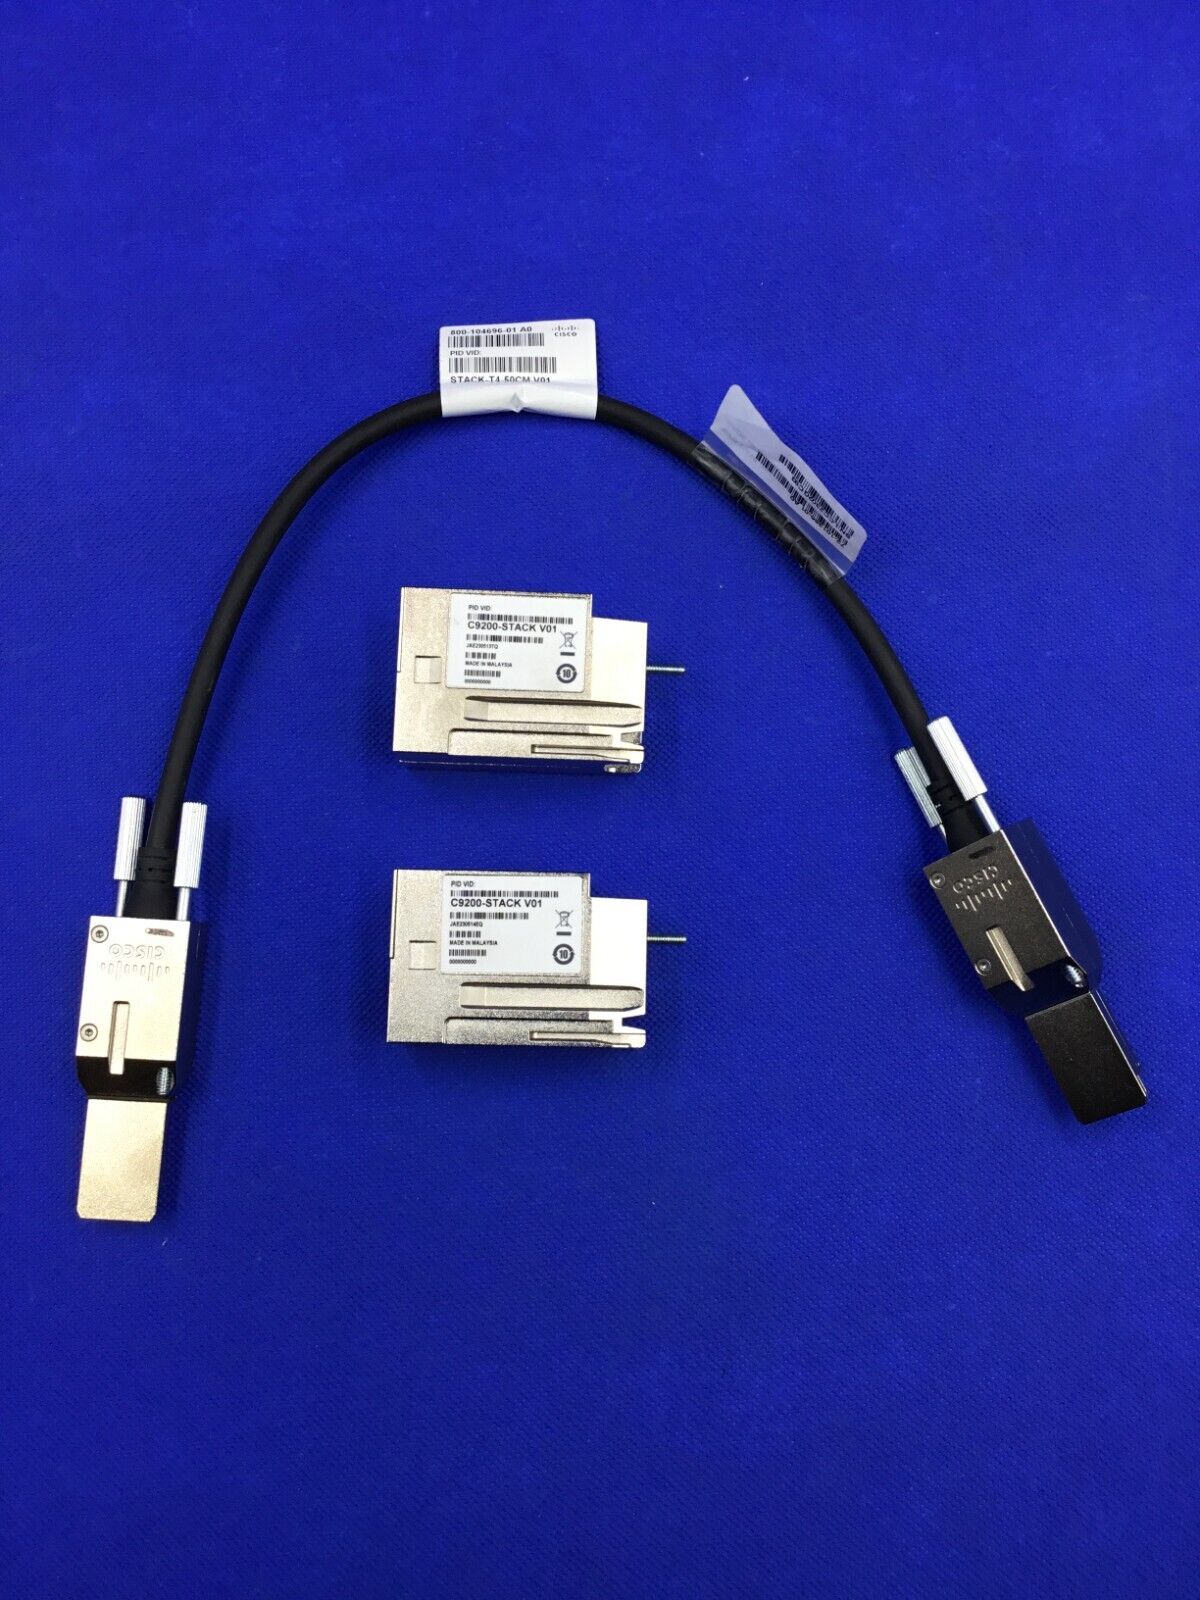 C9200-STACK-KIT Cisco Catalyst 9200 Stack Module 50cm Cable C9200-STACK-KIT-50CM